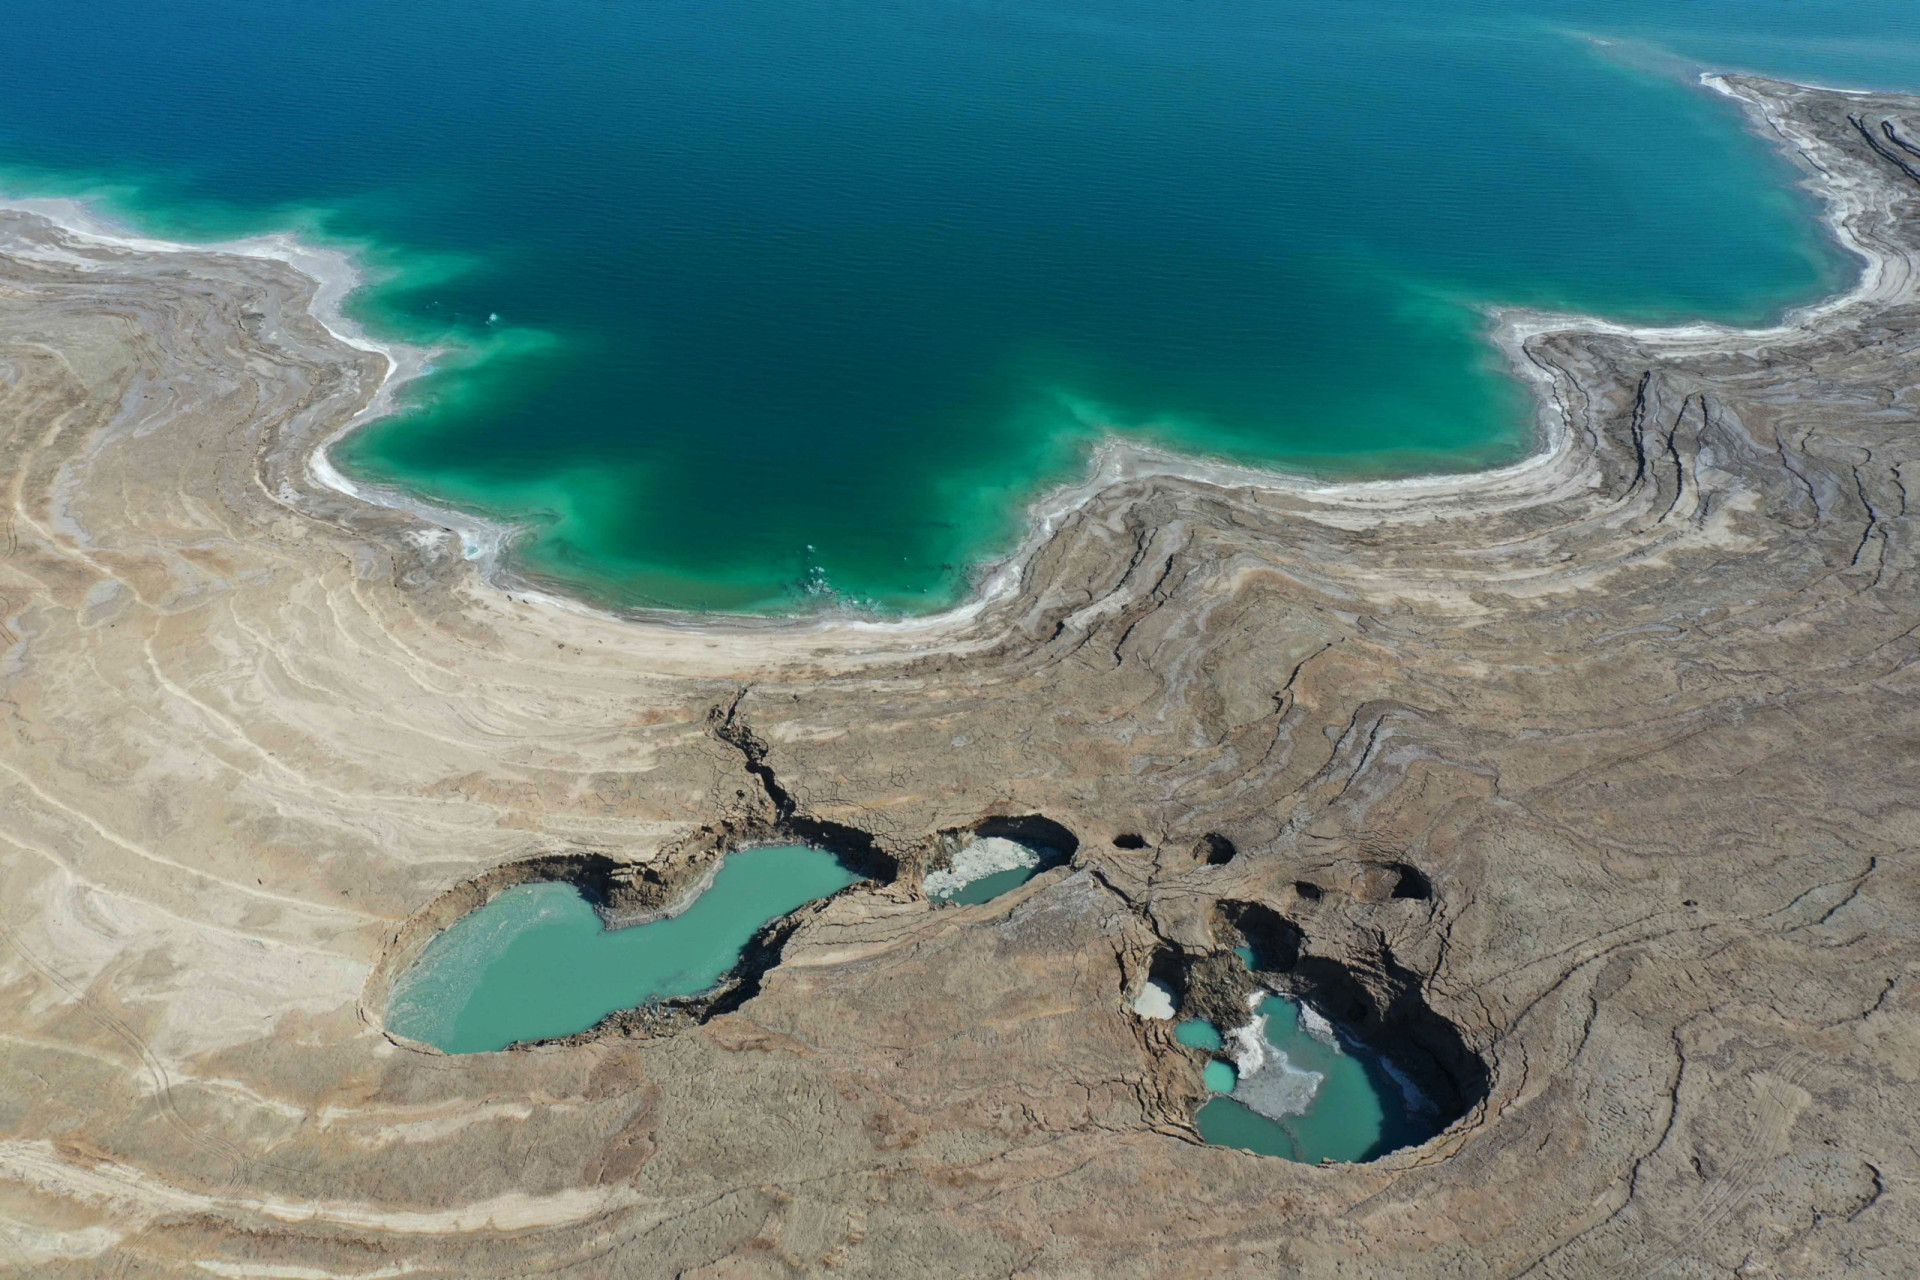 <p>The biggest surprise, though, was the identification of fish and other marine life spotted in sinkholes located on the shoreline. The revelation was made by Noam Bedein, an Israeli photojournalist working with the Dead Sea Revival Project.</p><p>You may also like:<a href="https://www.starsinsider.com/n/375628?utm_source=msn.com&utm_medium=display&utm_campaign=referral_description&utm_content=573453en-en"> Foods you didn’t know you could freeze</a></p>